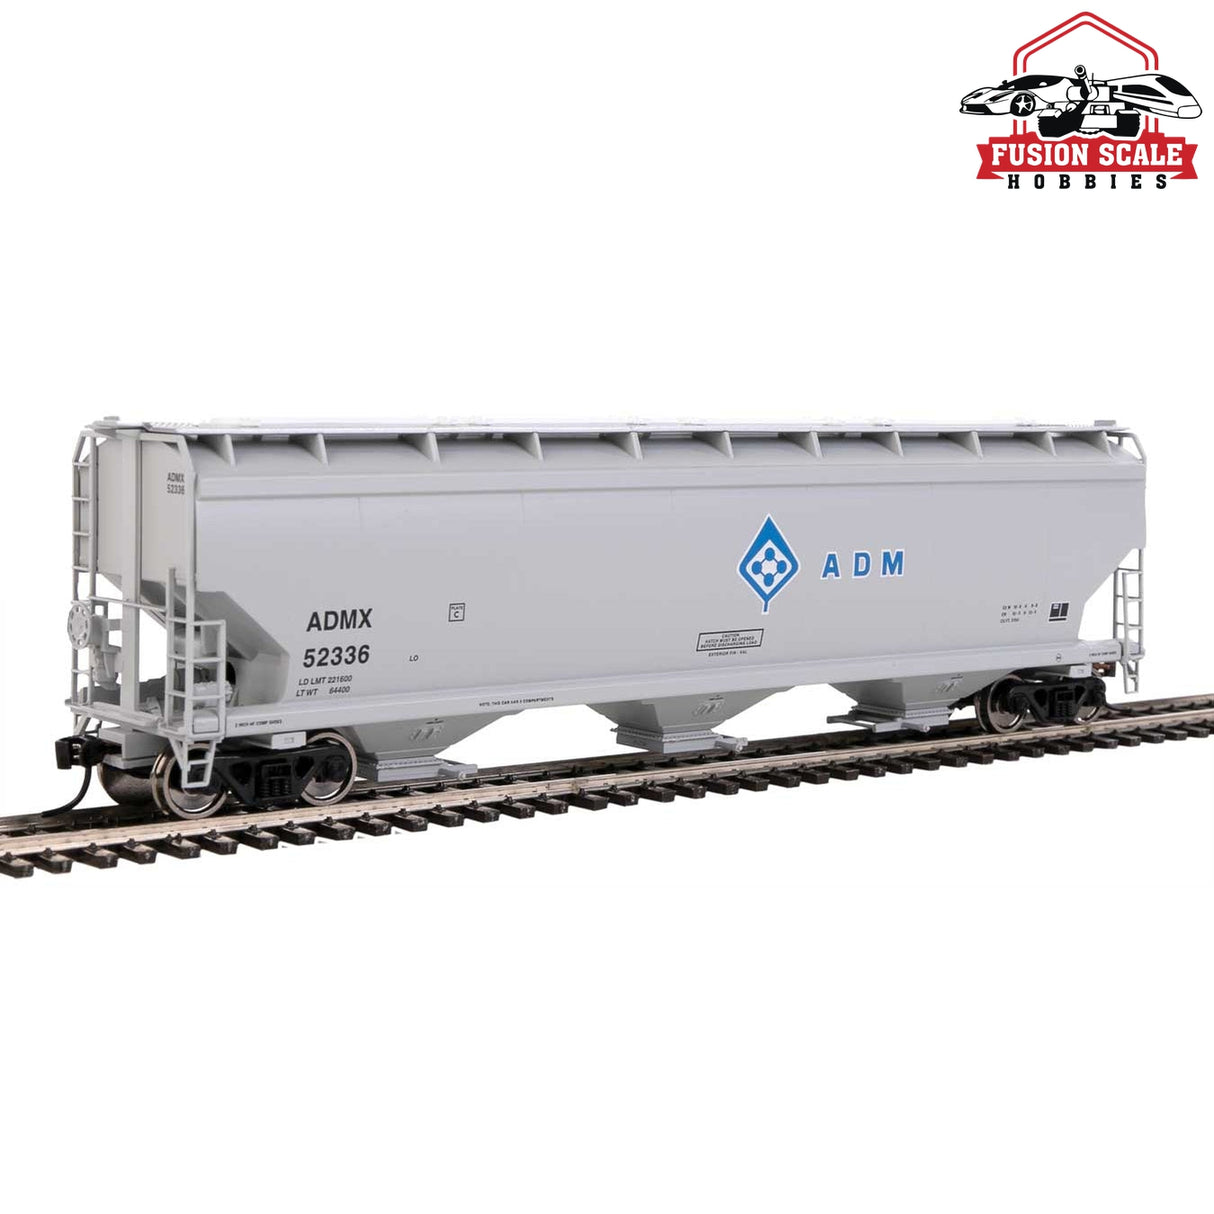 Walthers Mainline HO Scale 60' NSC 5150 3-Bay Covered Hopper Ready to Run Archer-Daniels-Midland ADMX #52336